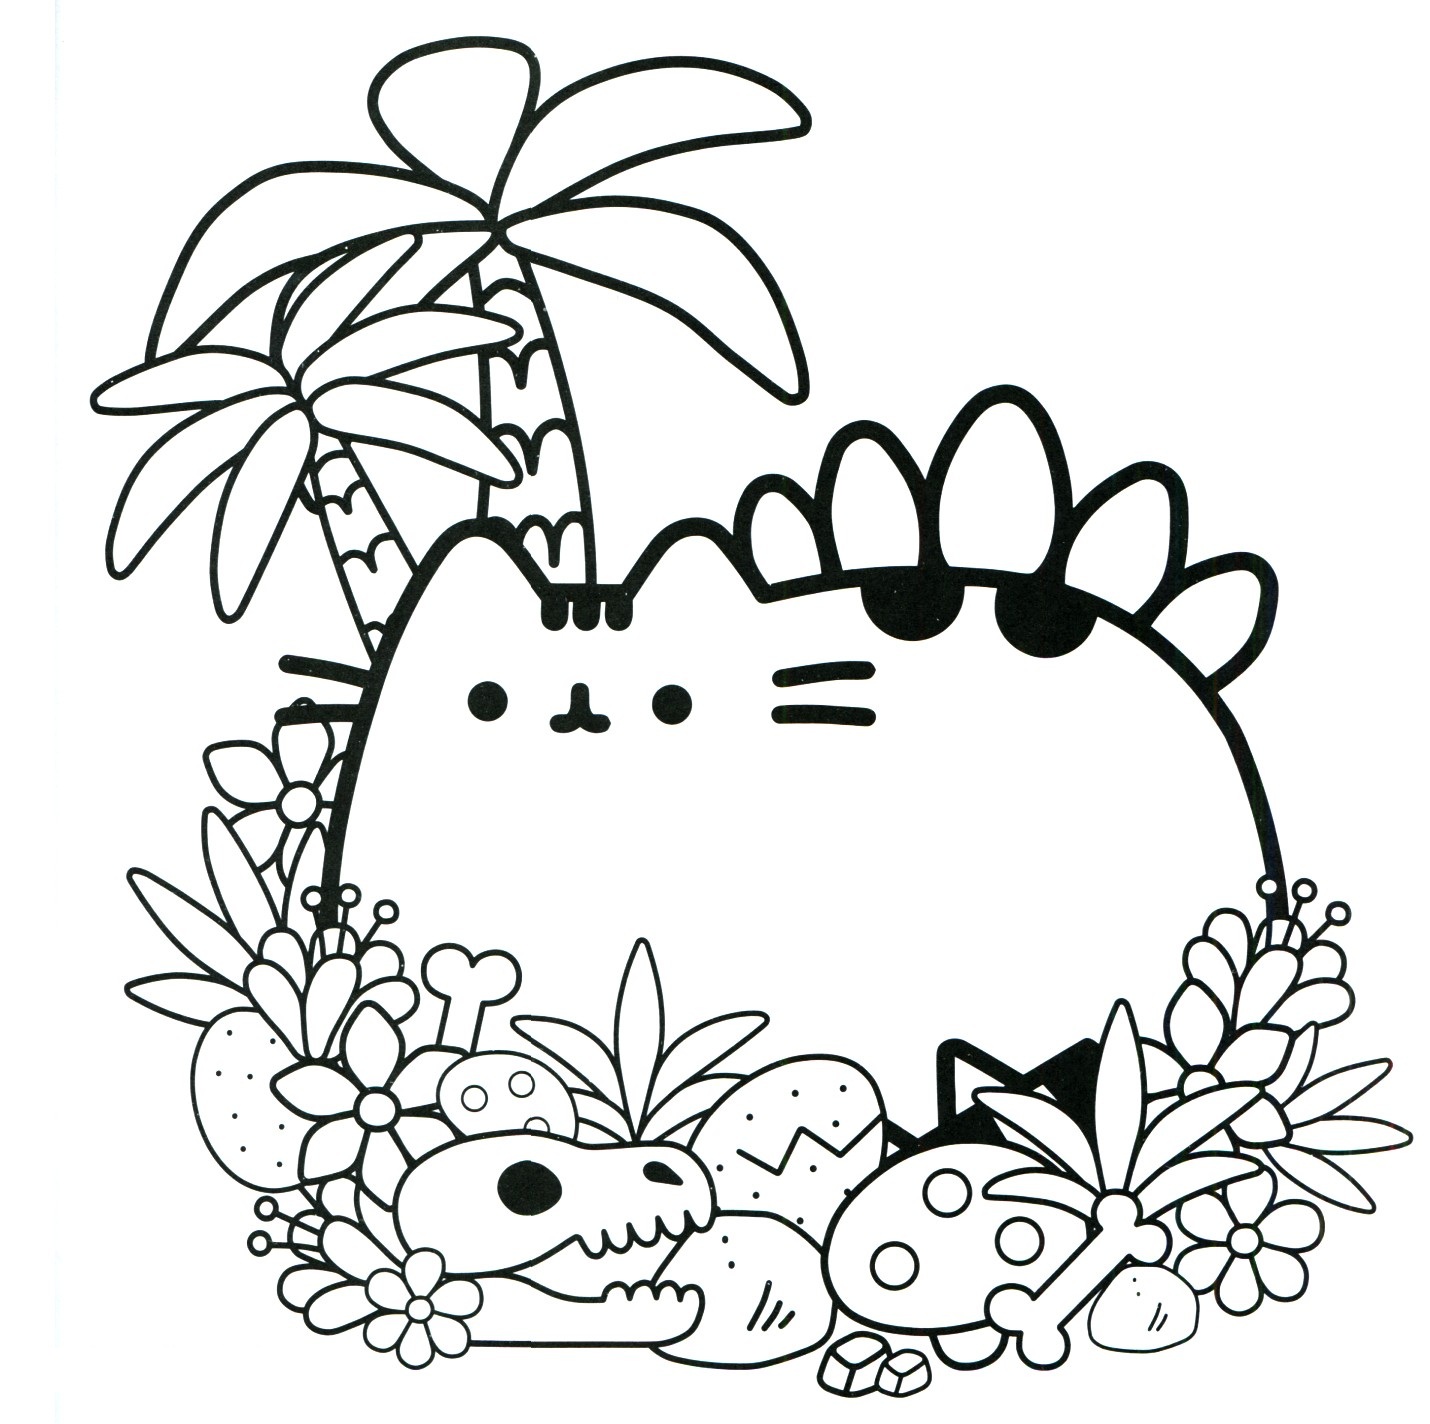 Cute Pusheen Coloring Page - Free Printable Coloring Pages ...